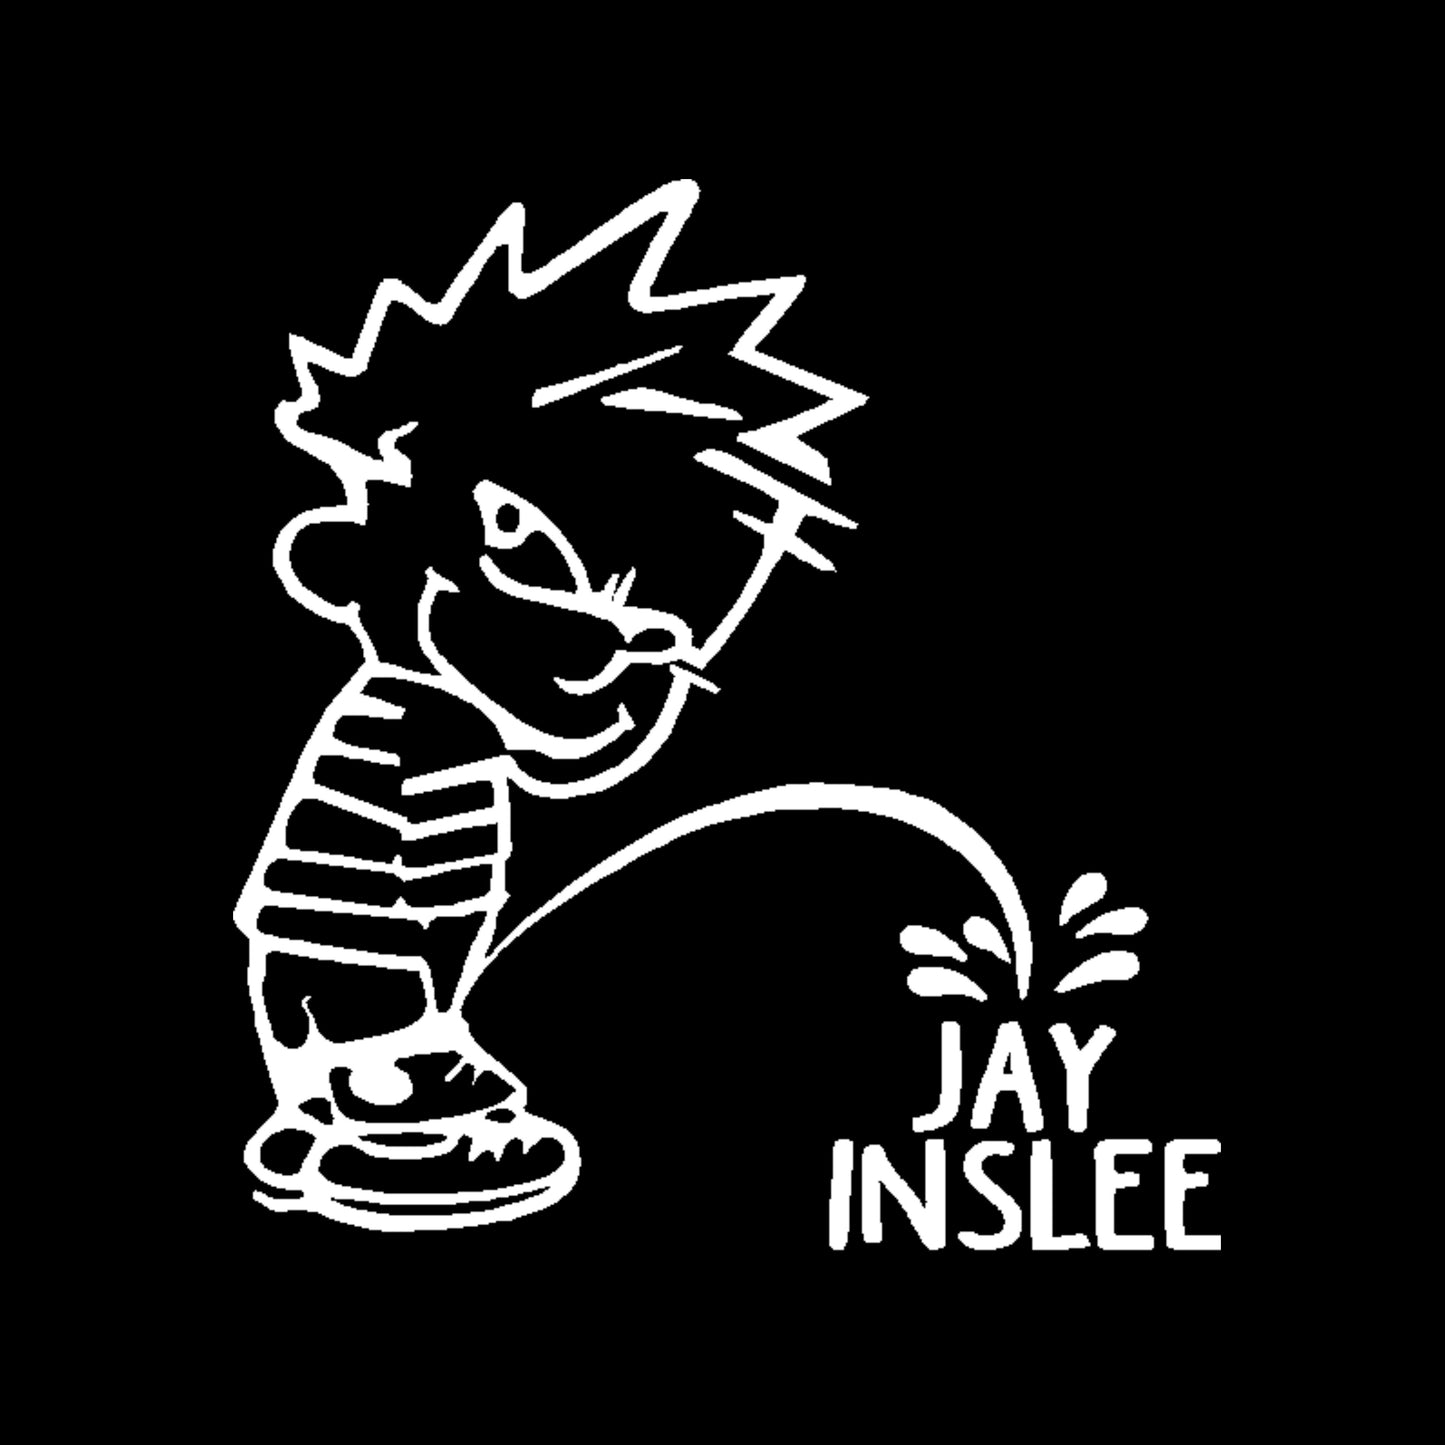 Calvin Peeing On Jay Inslee Decal, Calvin Peeing On Government Sticker, H 6 by L 6 Inches